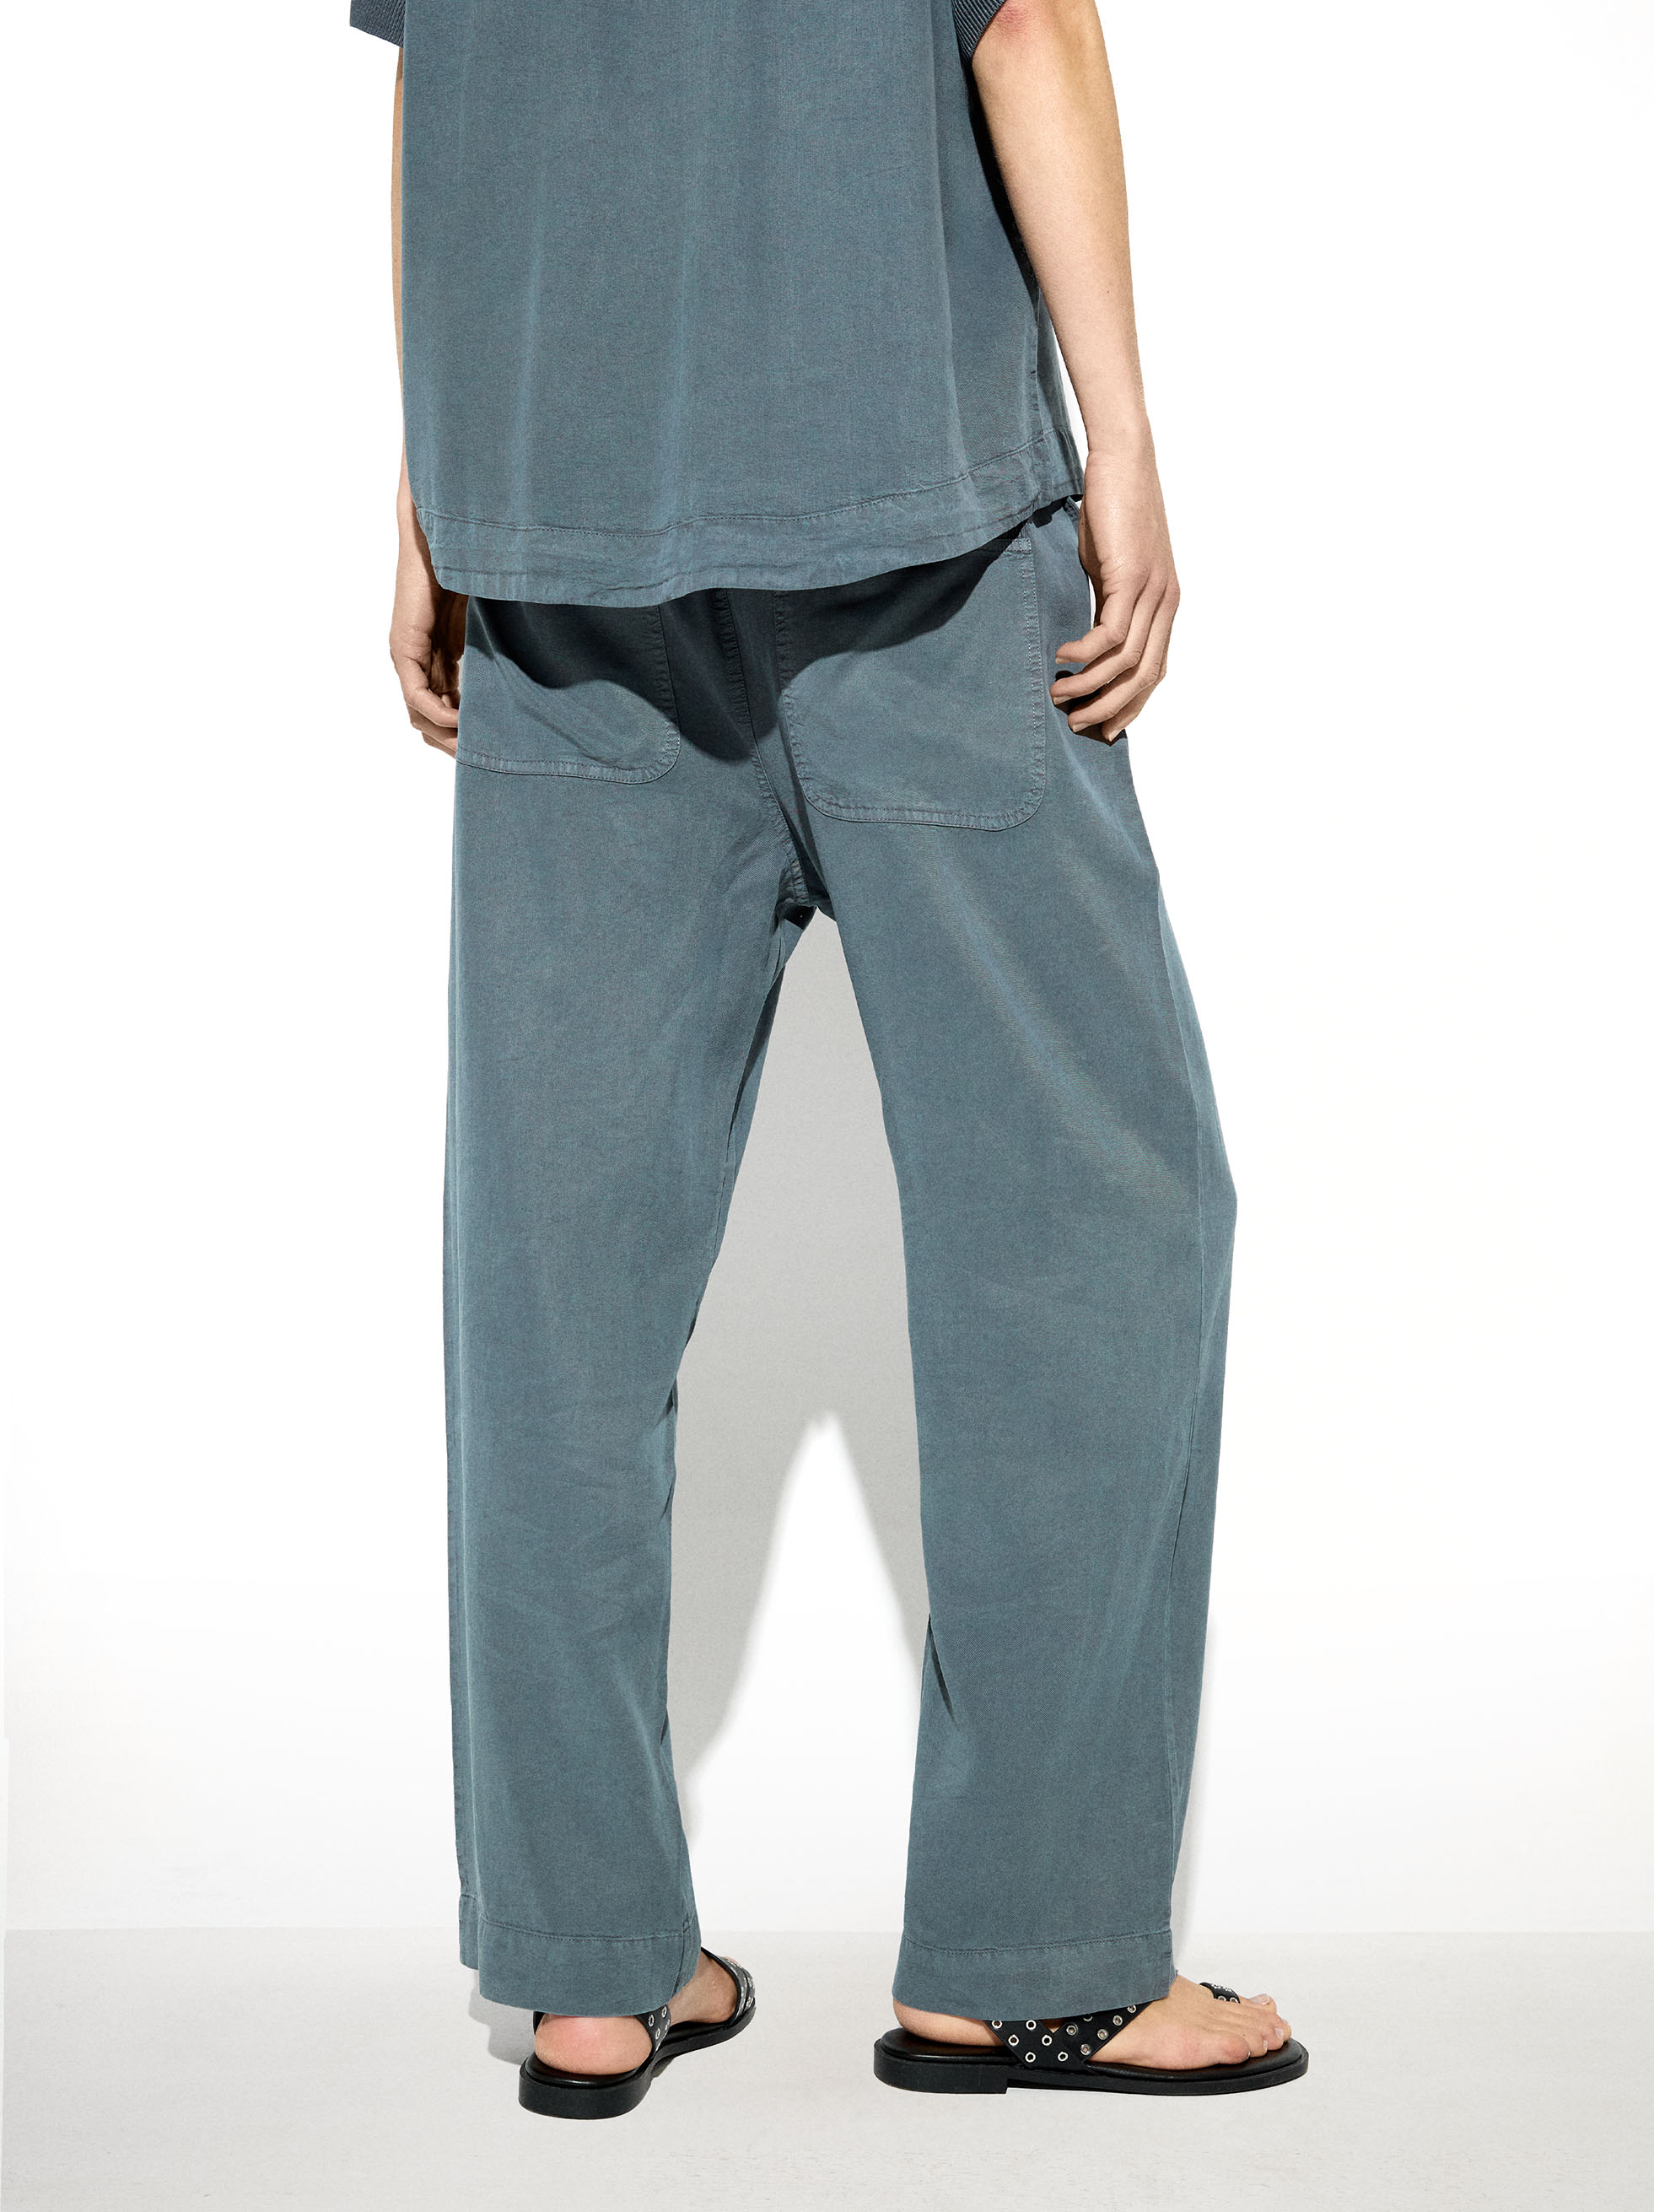 Adjustable Loose-Fitting Trousers Pants With Drawstring image number 3.0